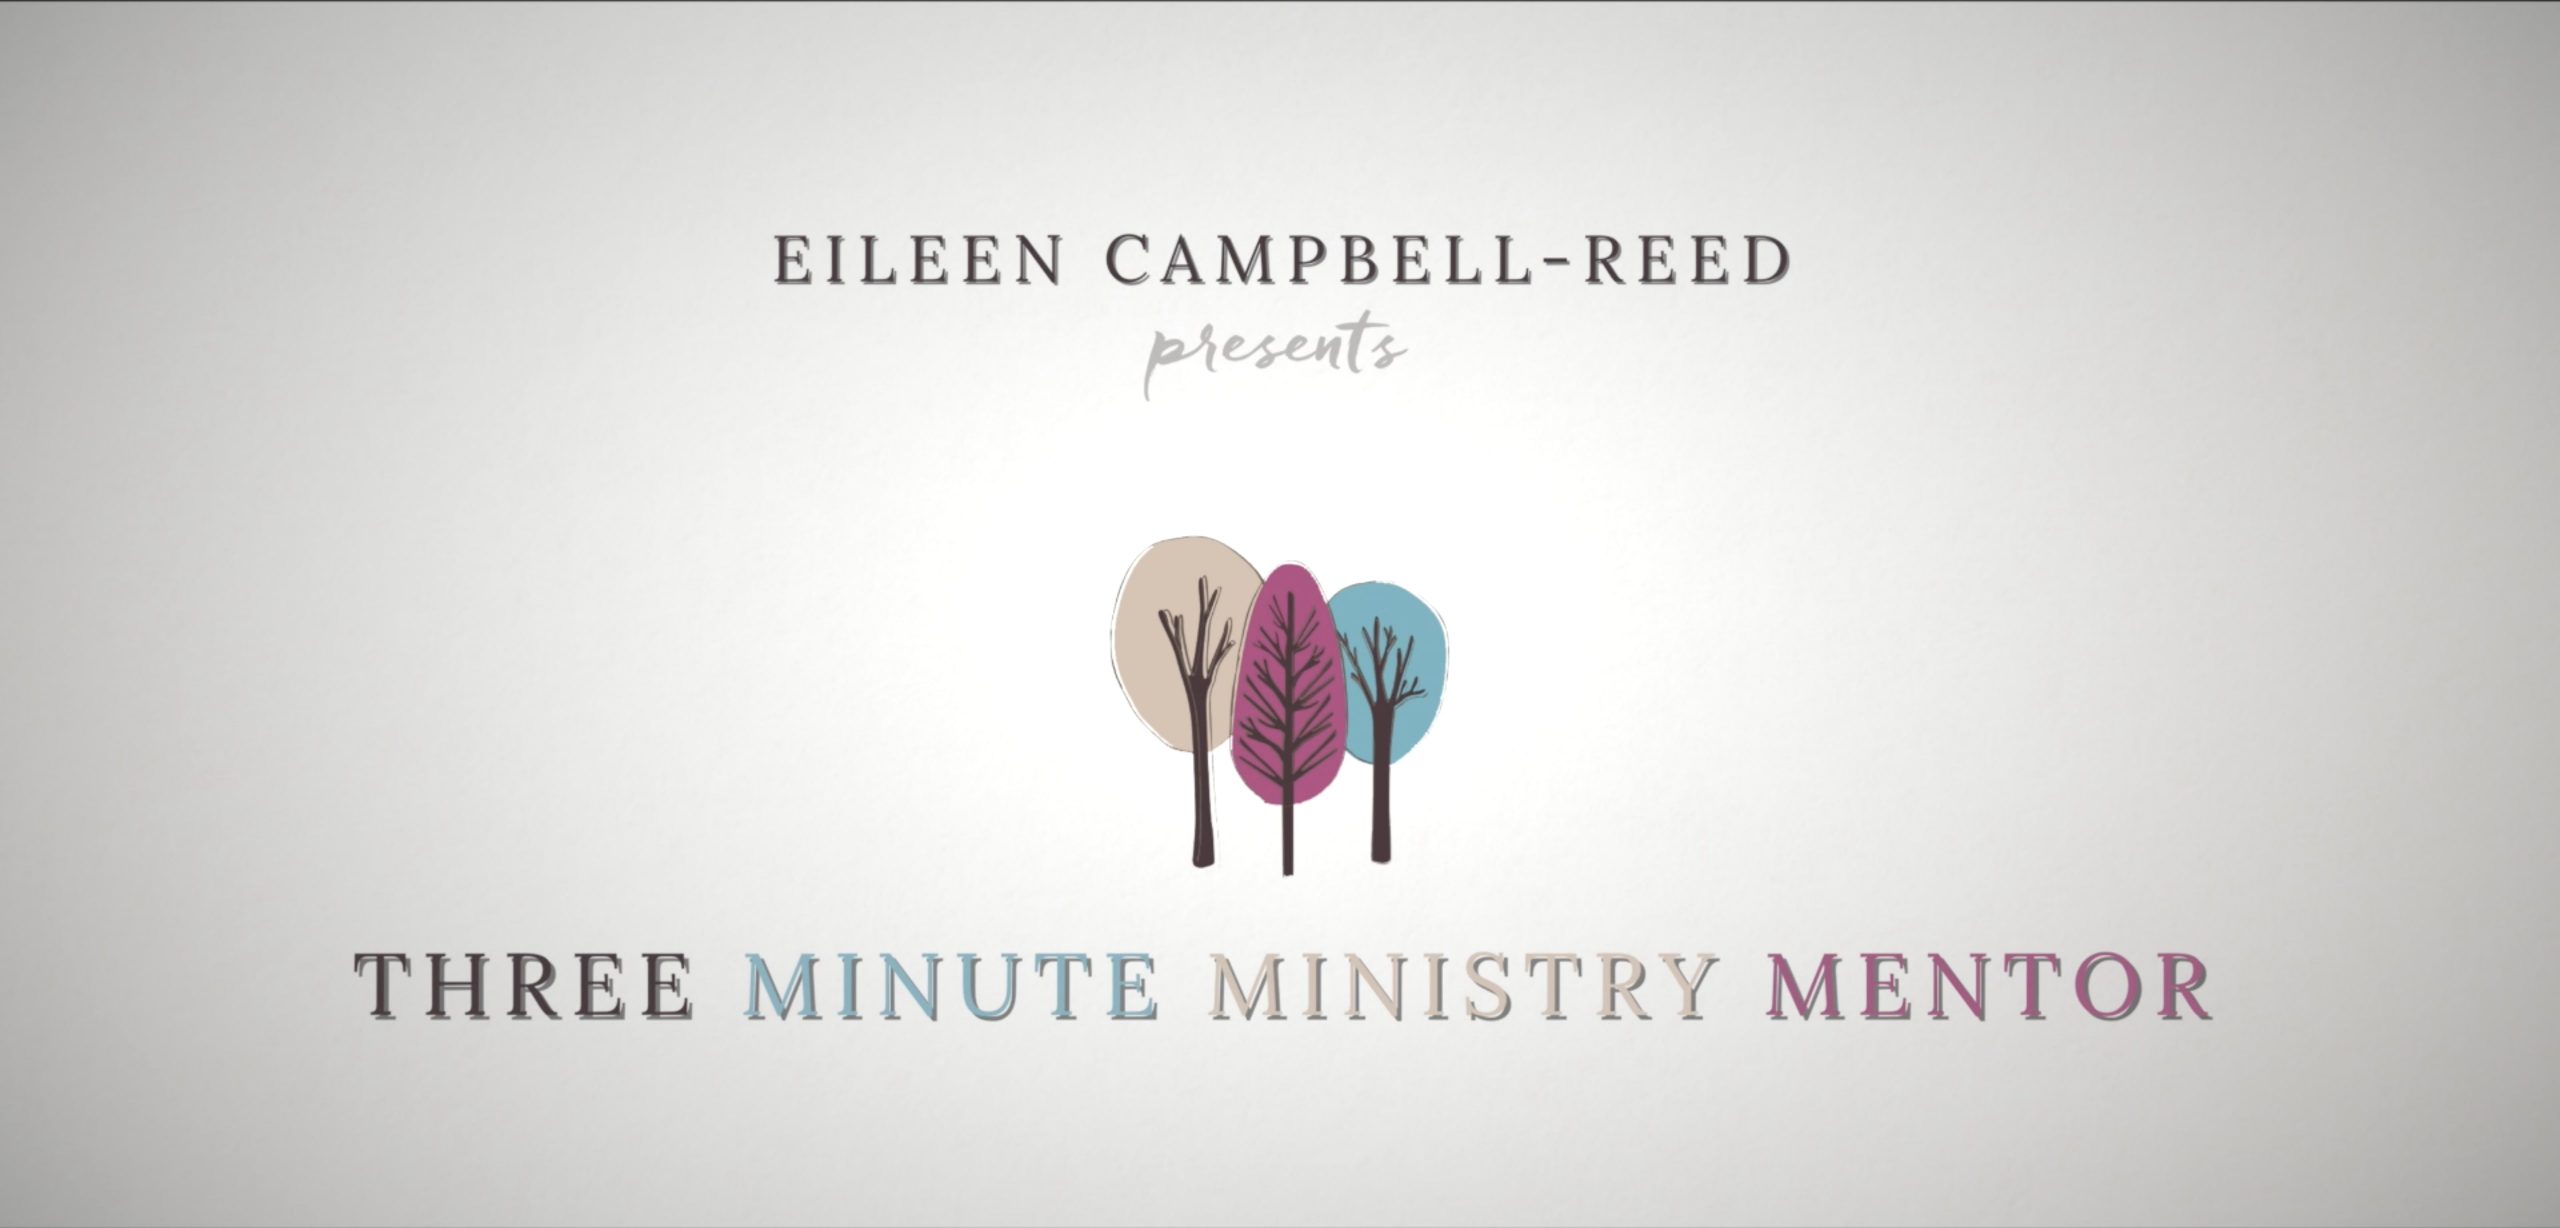 3 Minute Ministry Mentor a new project by Eileen Campbell-Reed